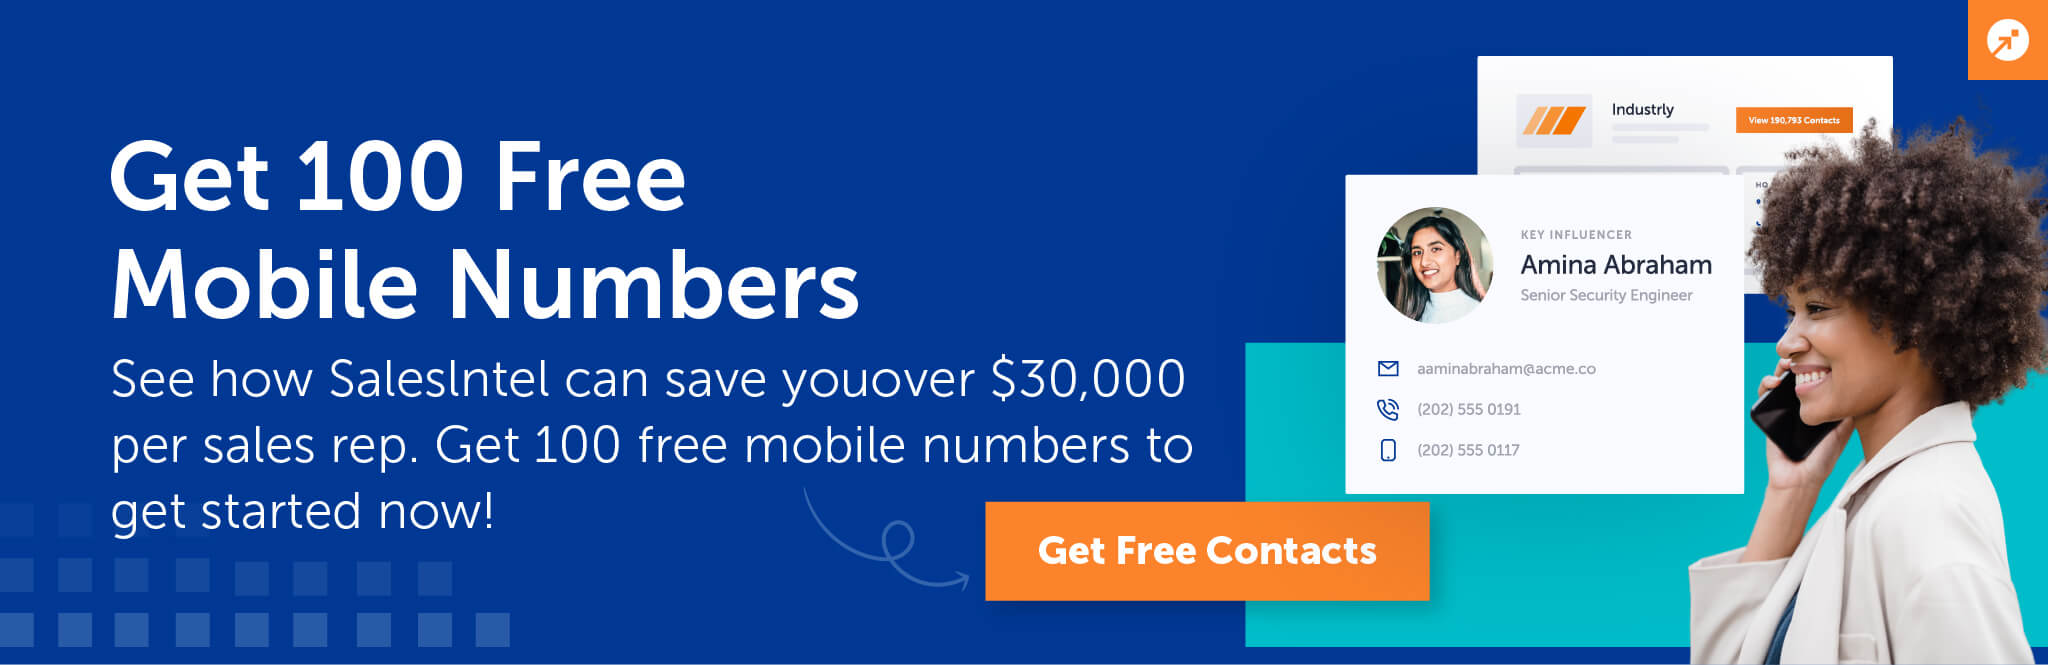 get 100 free mobile numbers